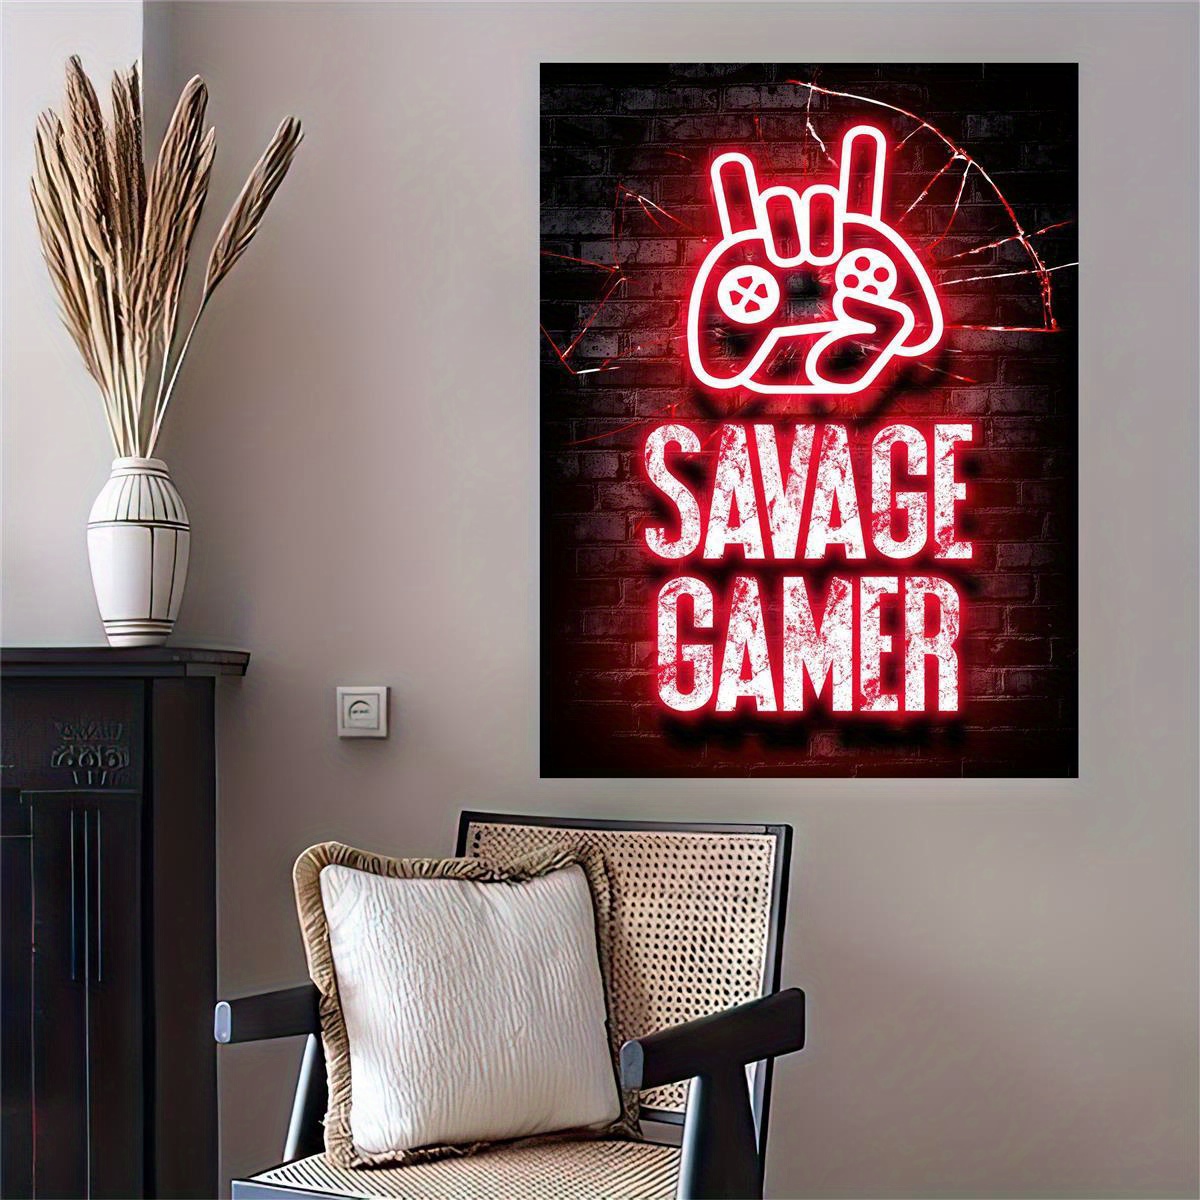  Gamer Room Decor - Neon Gaming Posters Bedroom Decor, Gaming  Accessories for your Playstation Gaming Stuff, Video Games Lover Gift